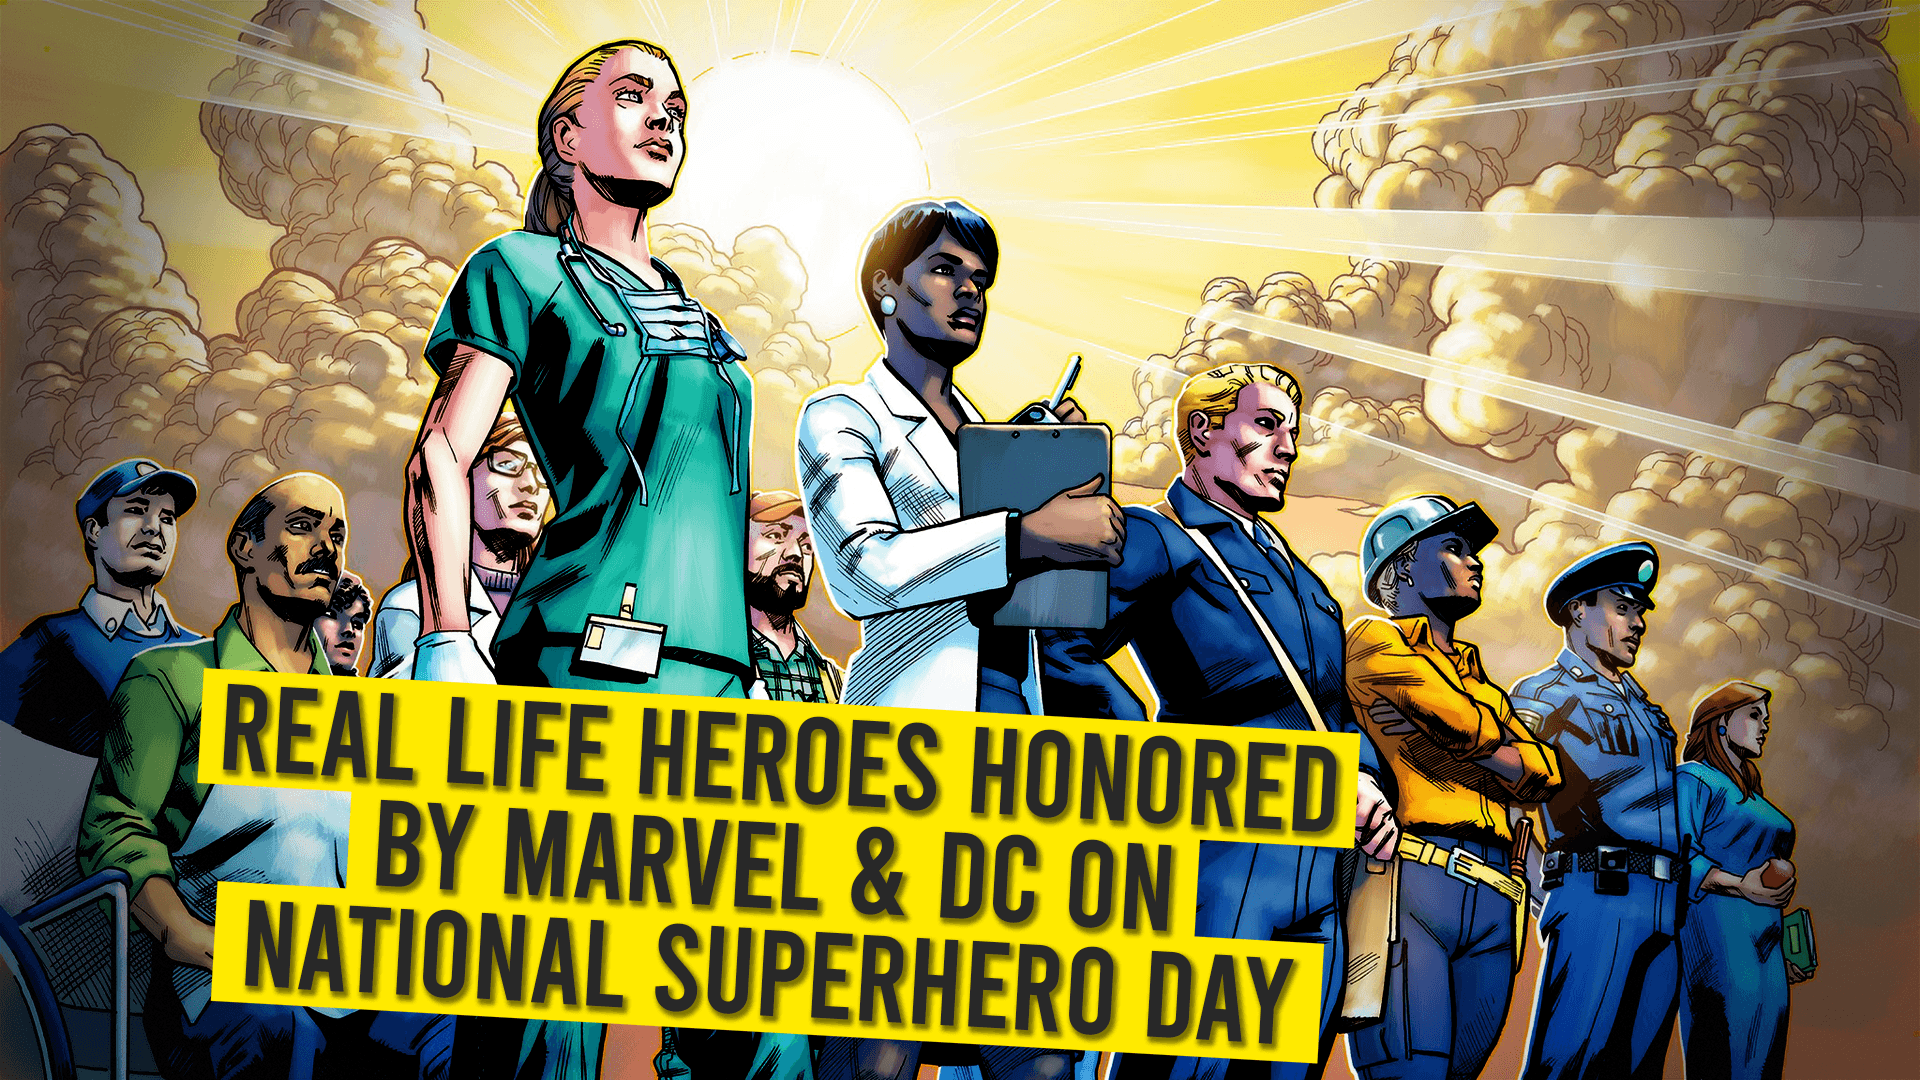 Real Life Heroes Honored By Marvel & DC On National Superhero Day